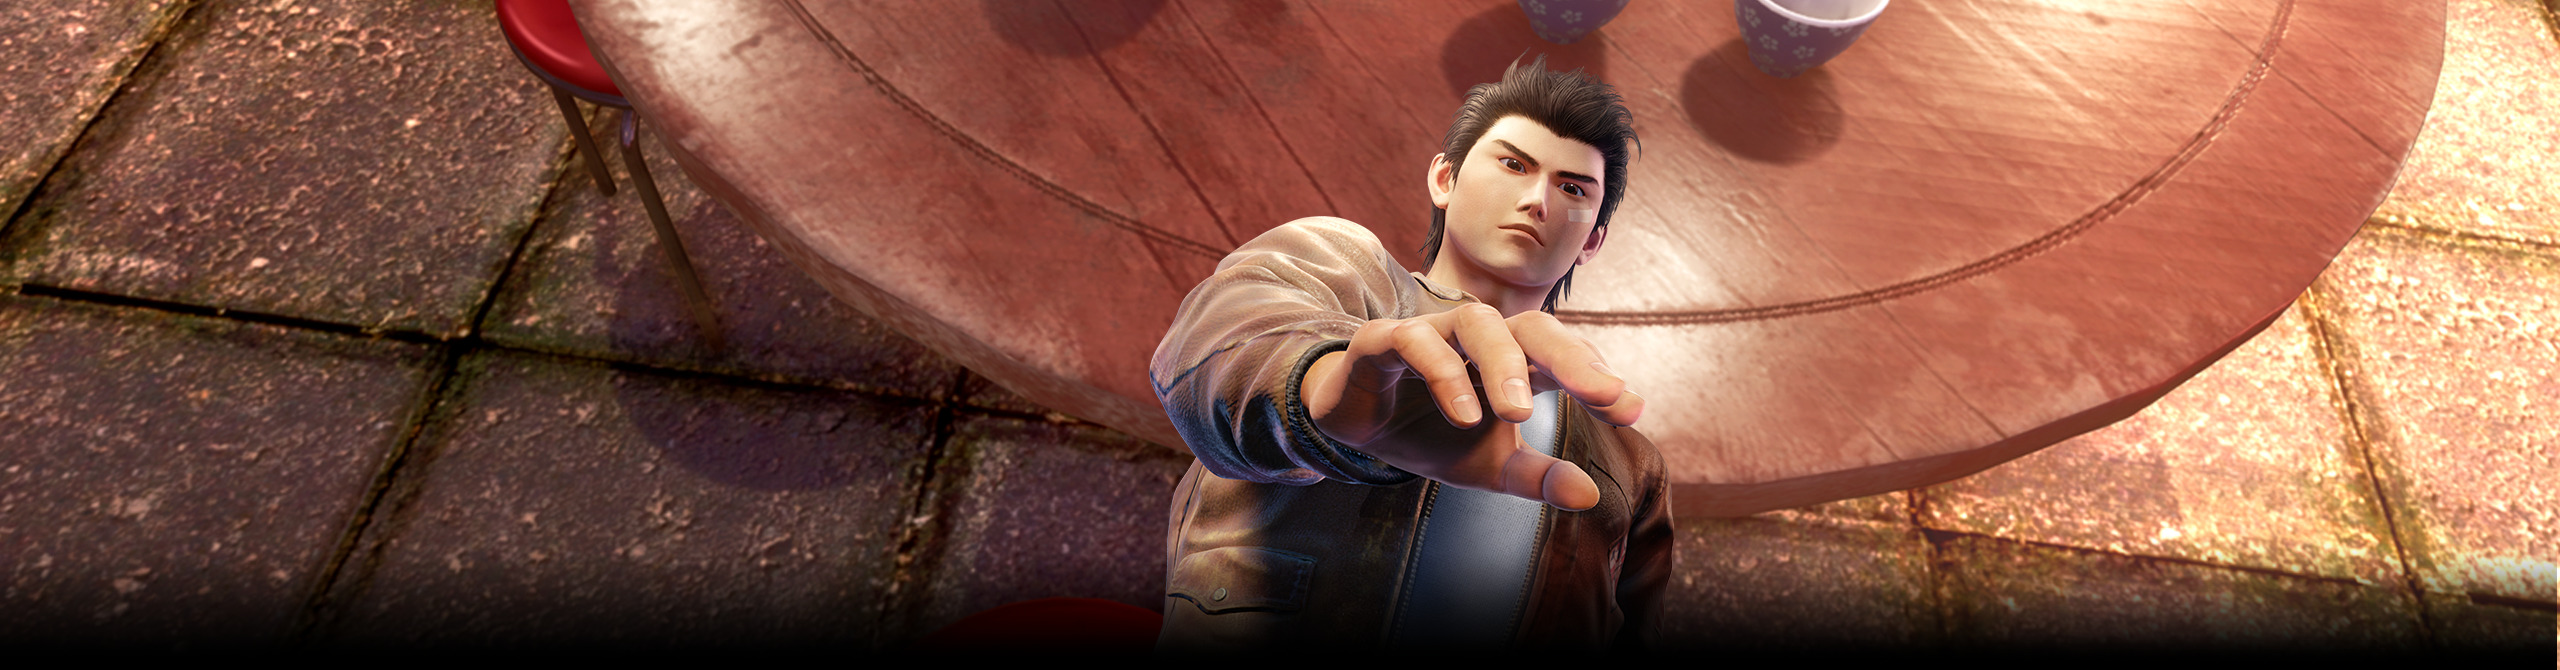 shenmue 3 side quest